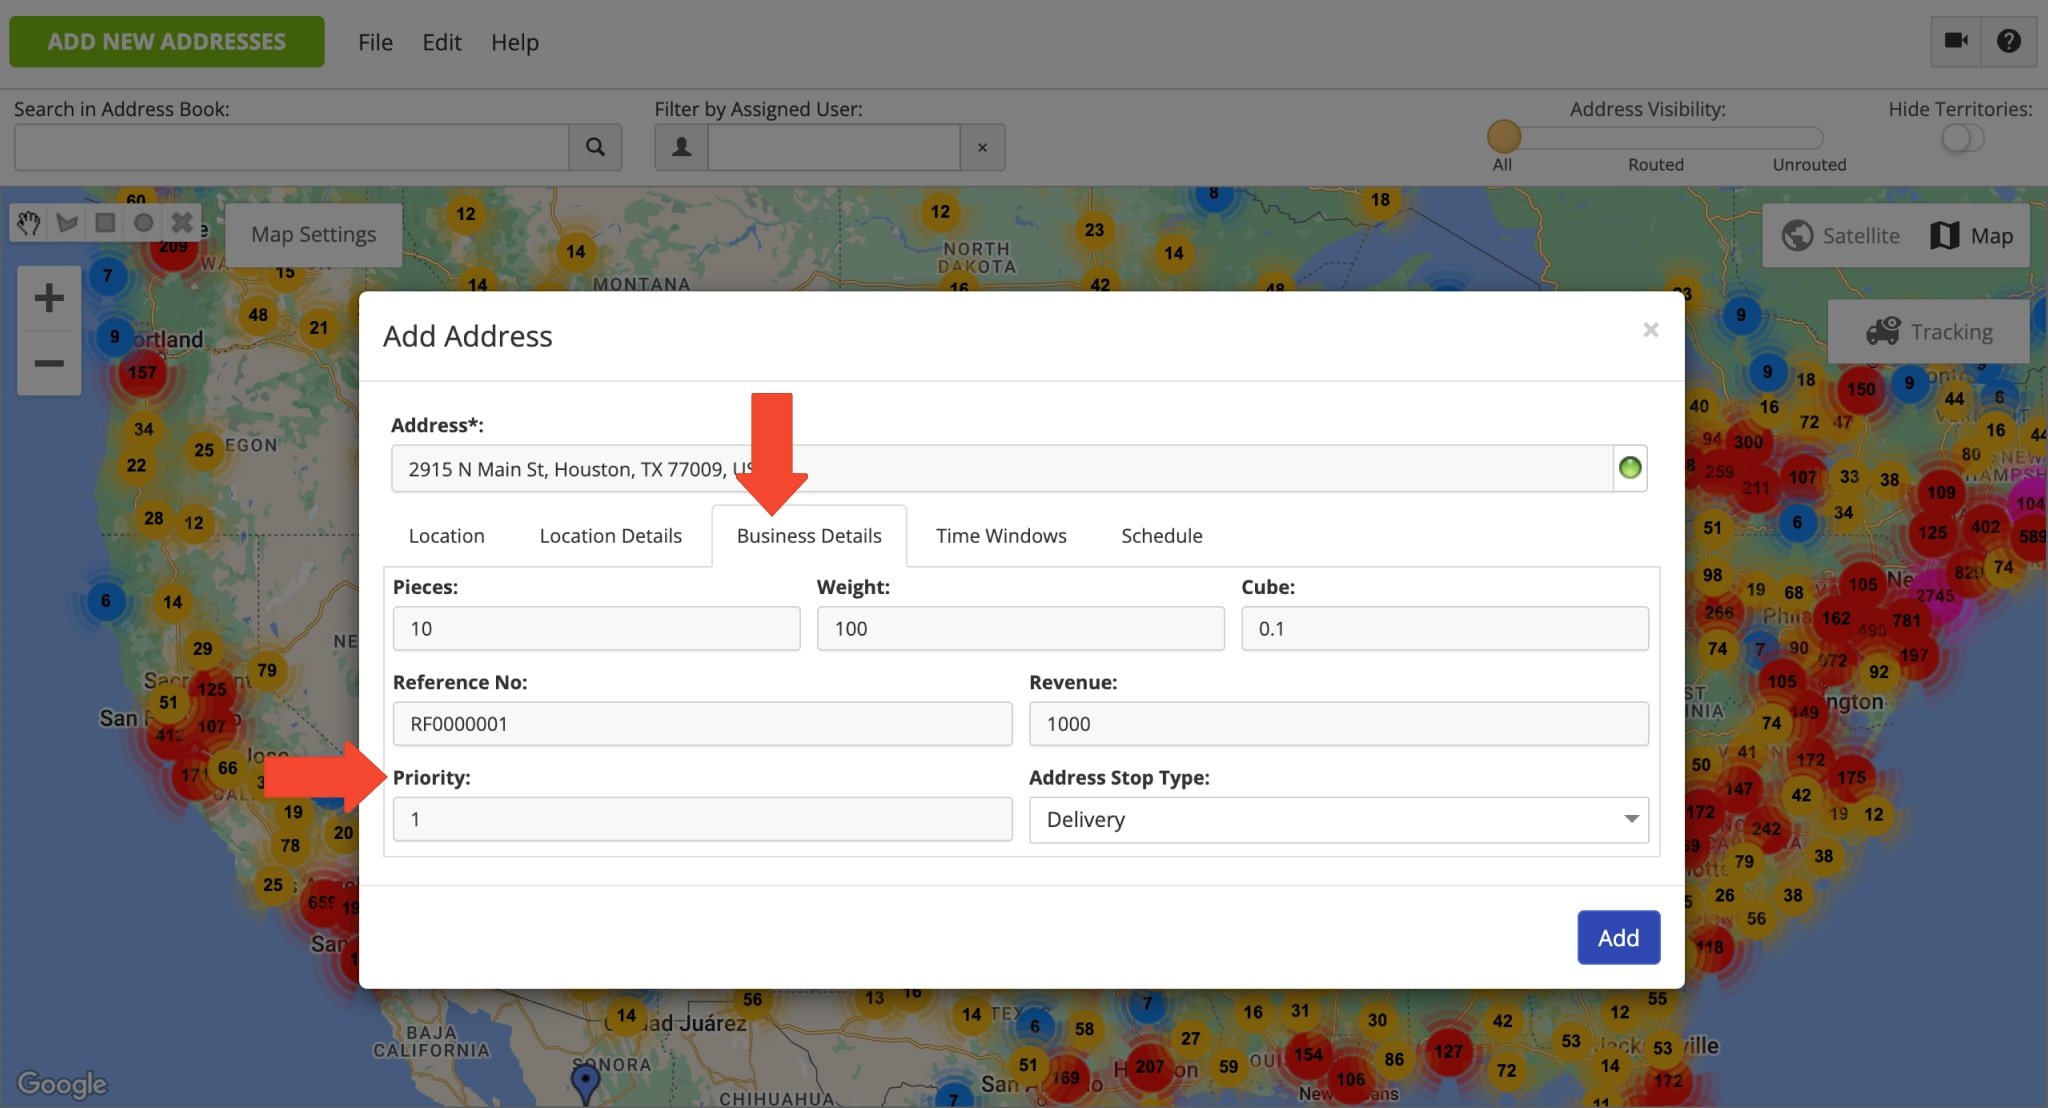 Add priority to customers and locations in the Address Book for planning and optimizing last mile prioritized routes.